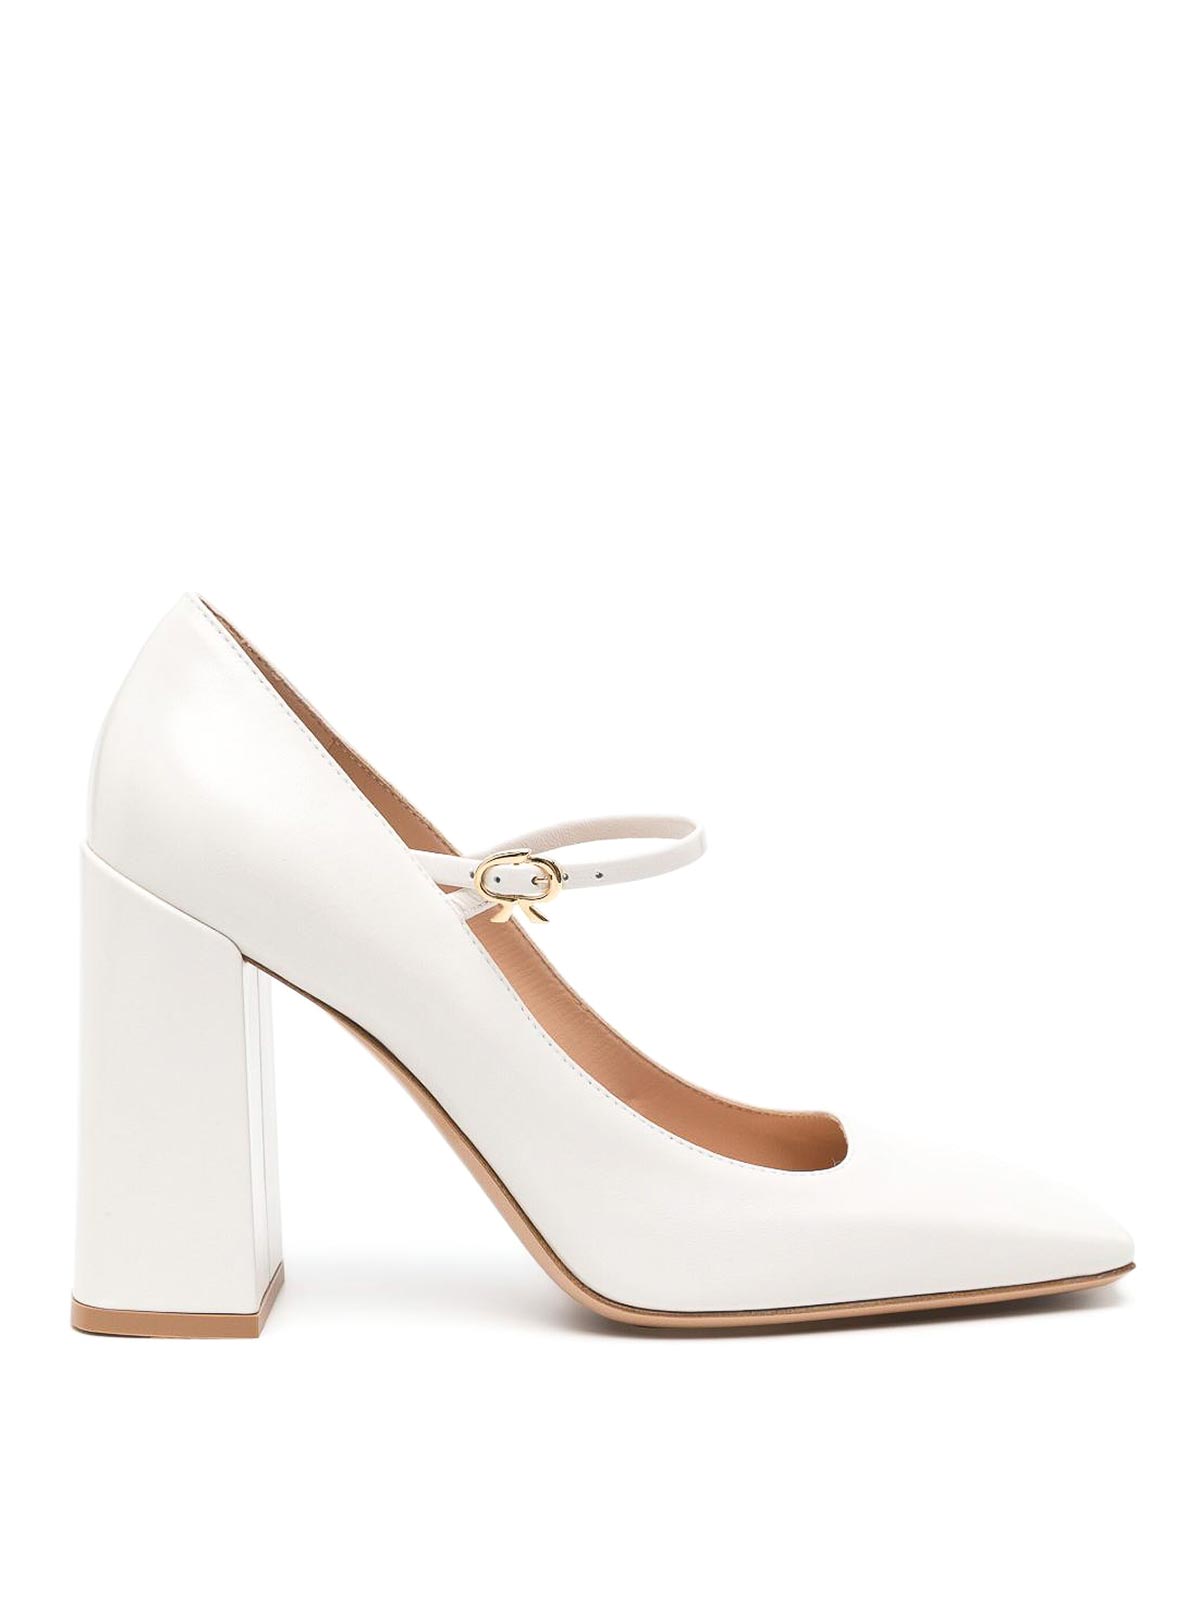 Gianvito Rossi Nuit Leather Pumps In White